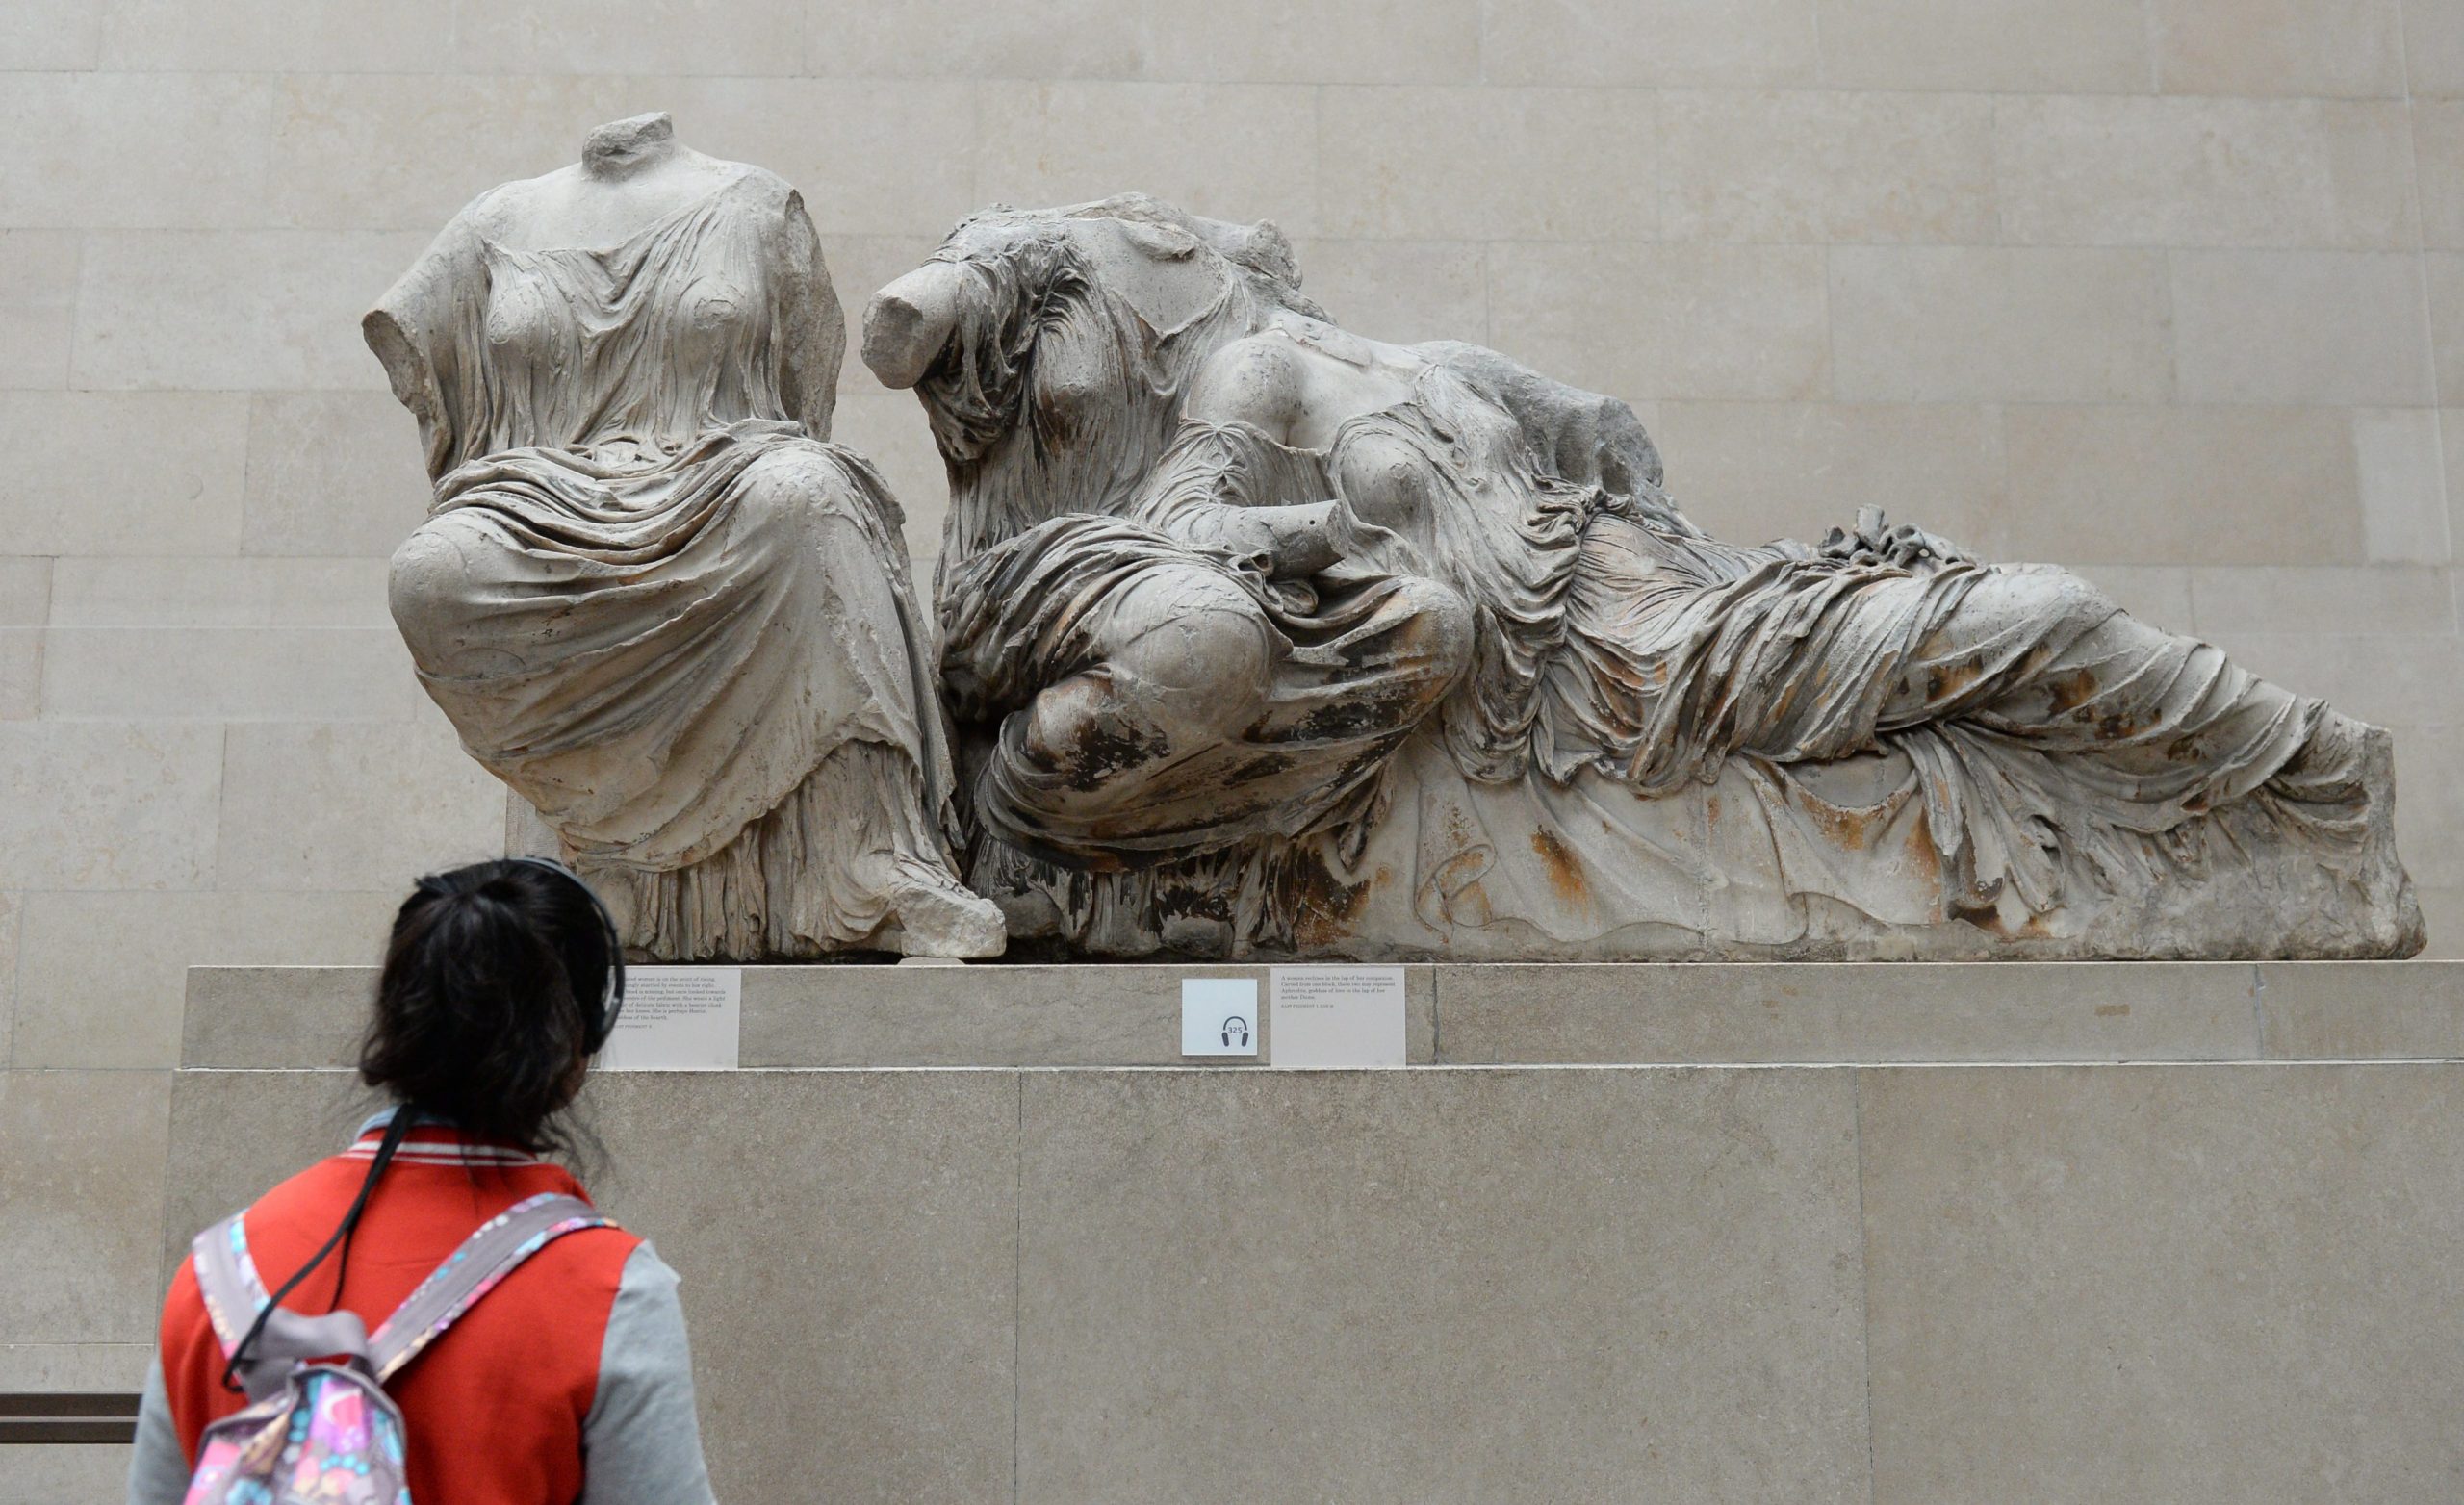 Mendoni – “Offensive to dangerous conditions for the Parthenon Sculptures”